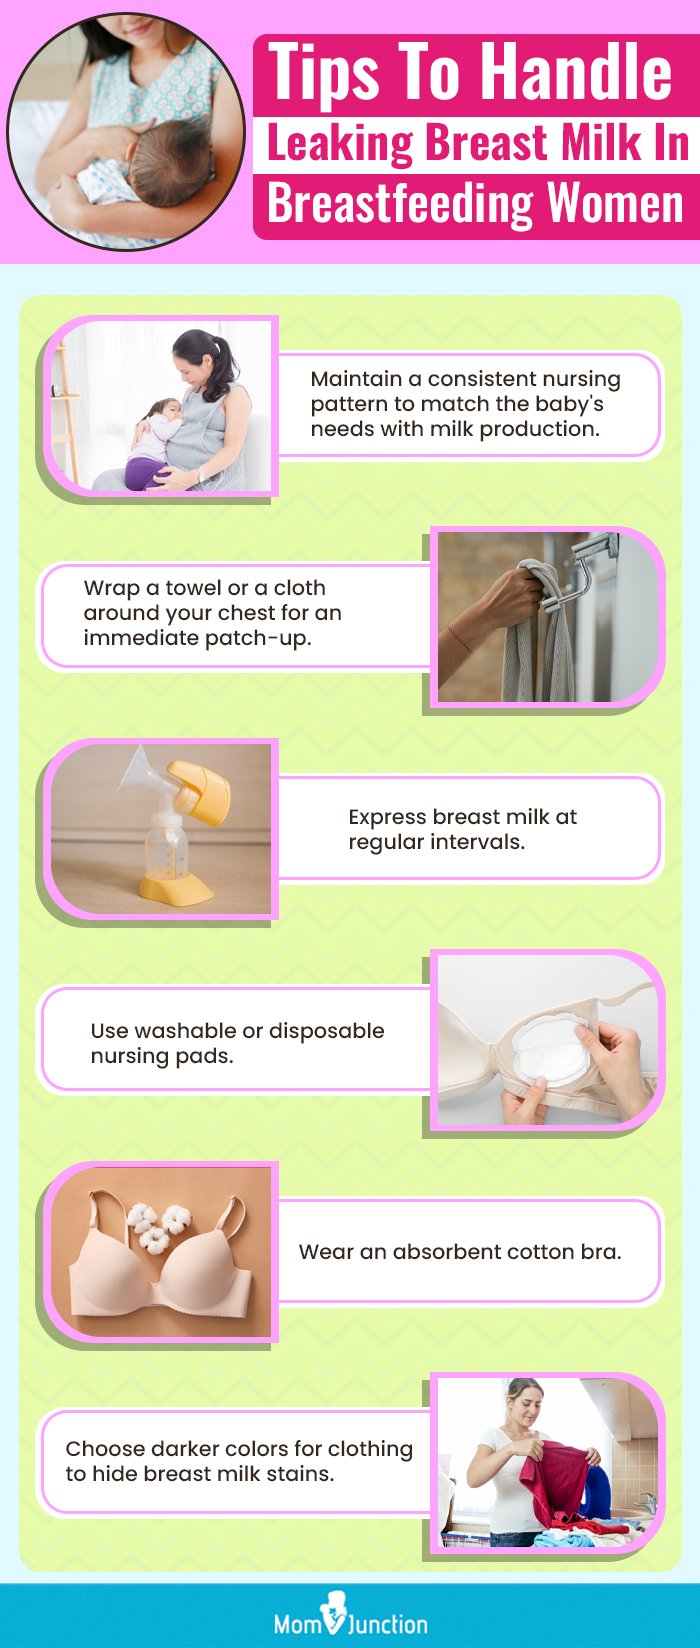 https://www.momjunction.com/wp-content/uploads/2014/07/Infographic-Effective-Ways-To-Deal-With-Breast-Leakage-In-Nursing-Mothers.jpg